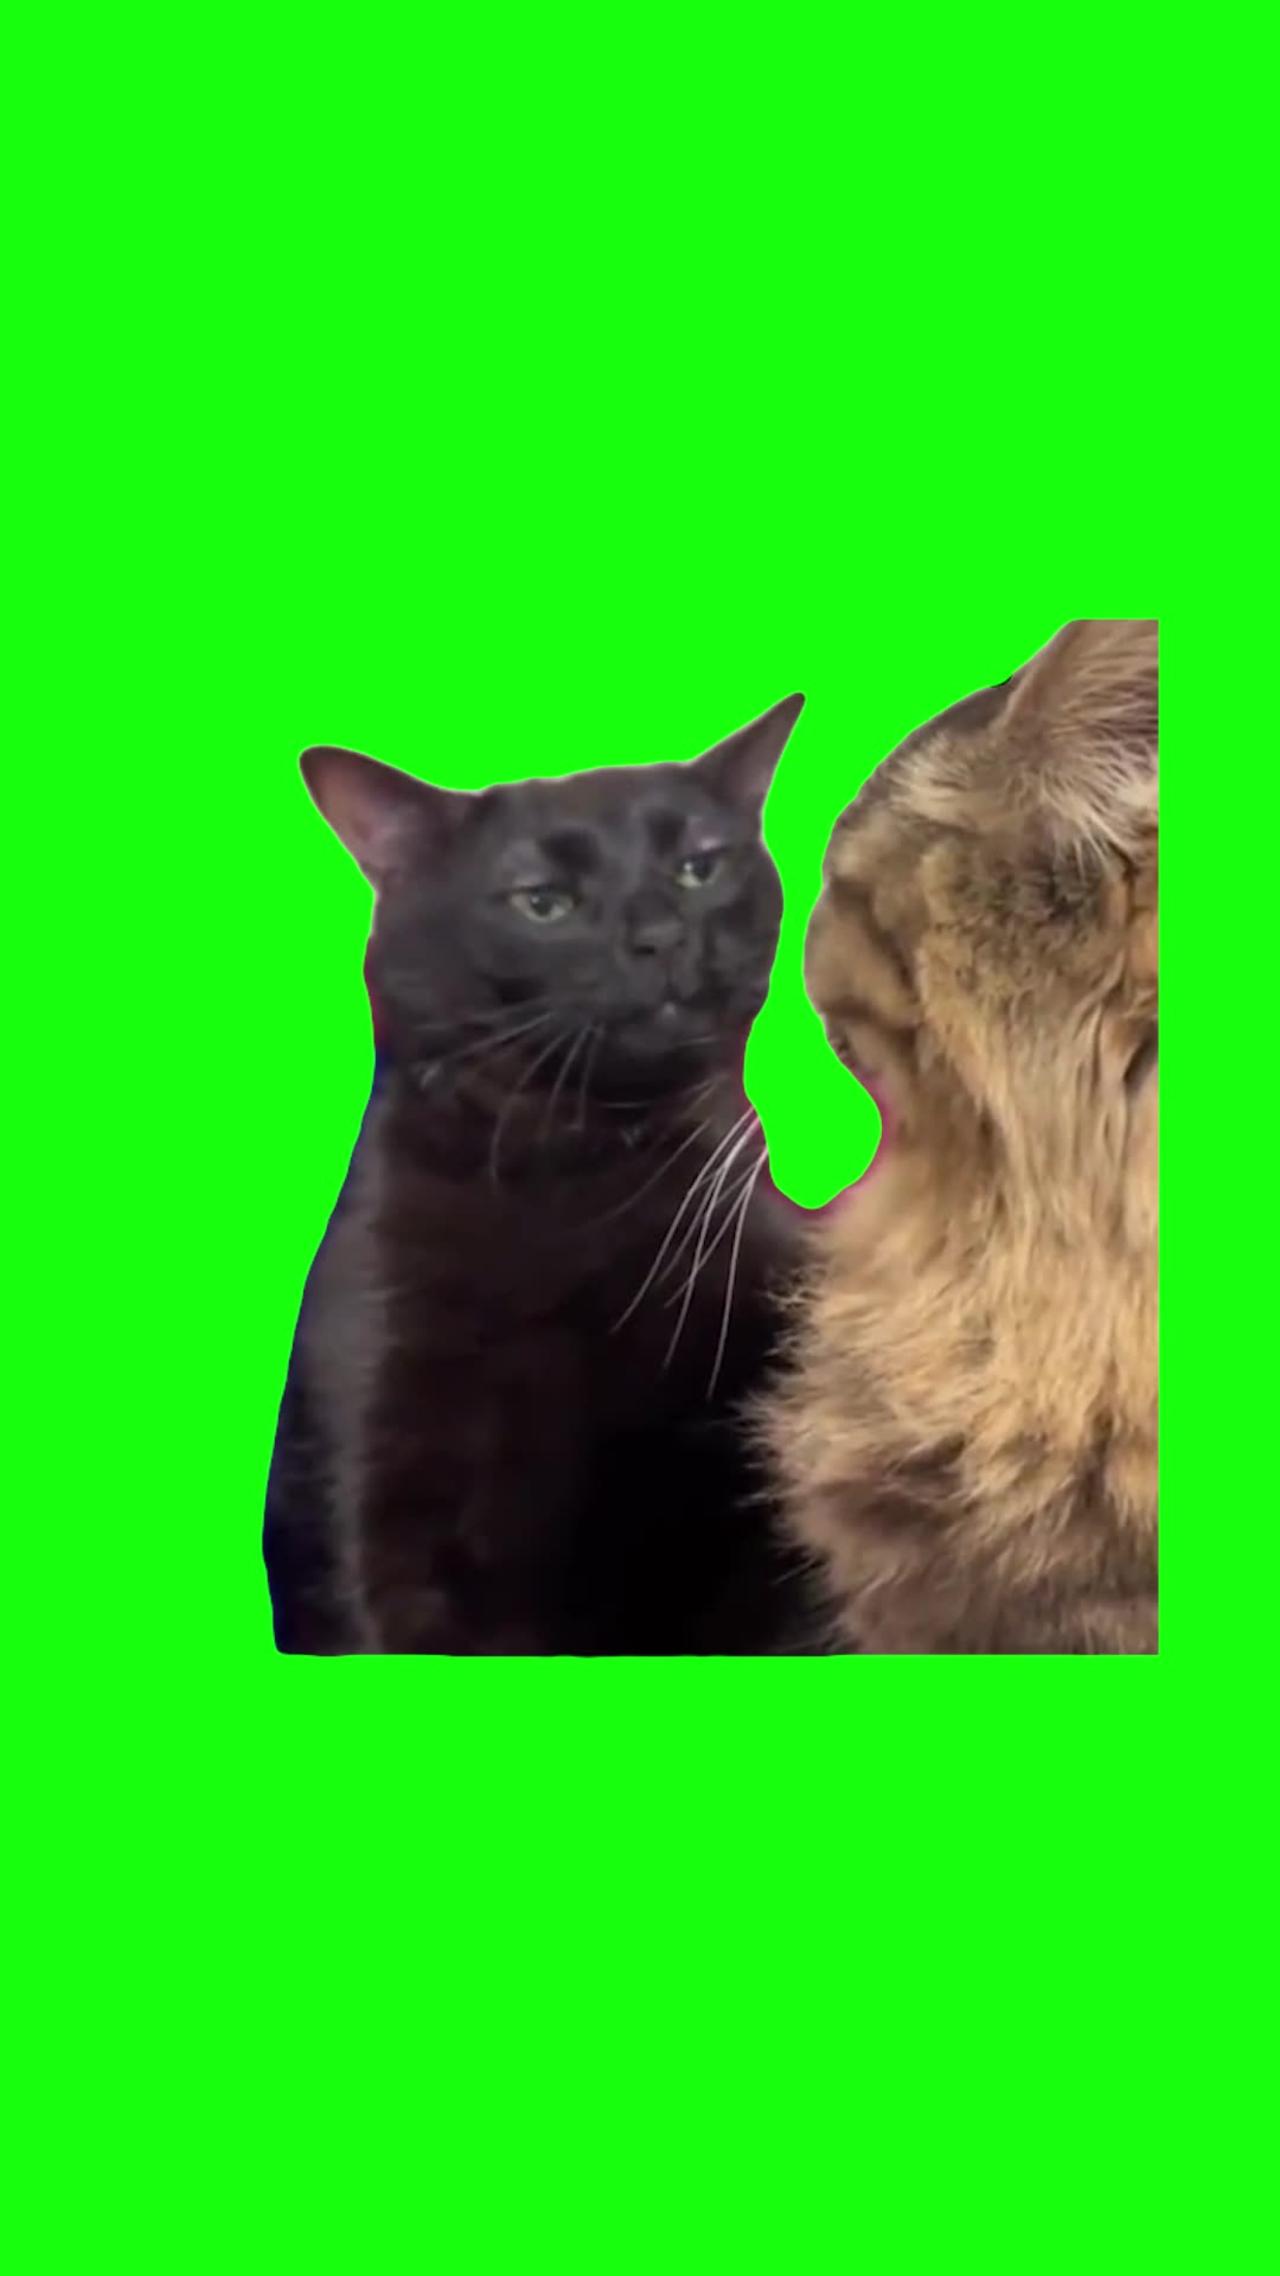 Black Cat Zoning Out | Green Screen